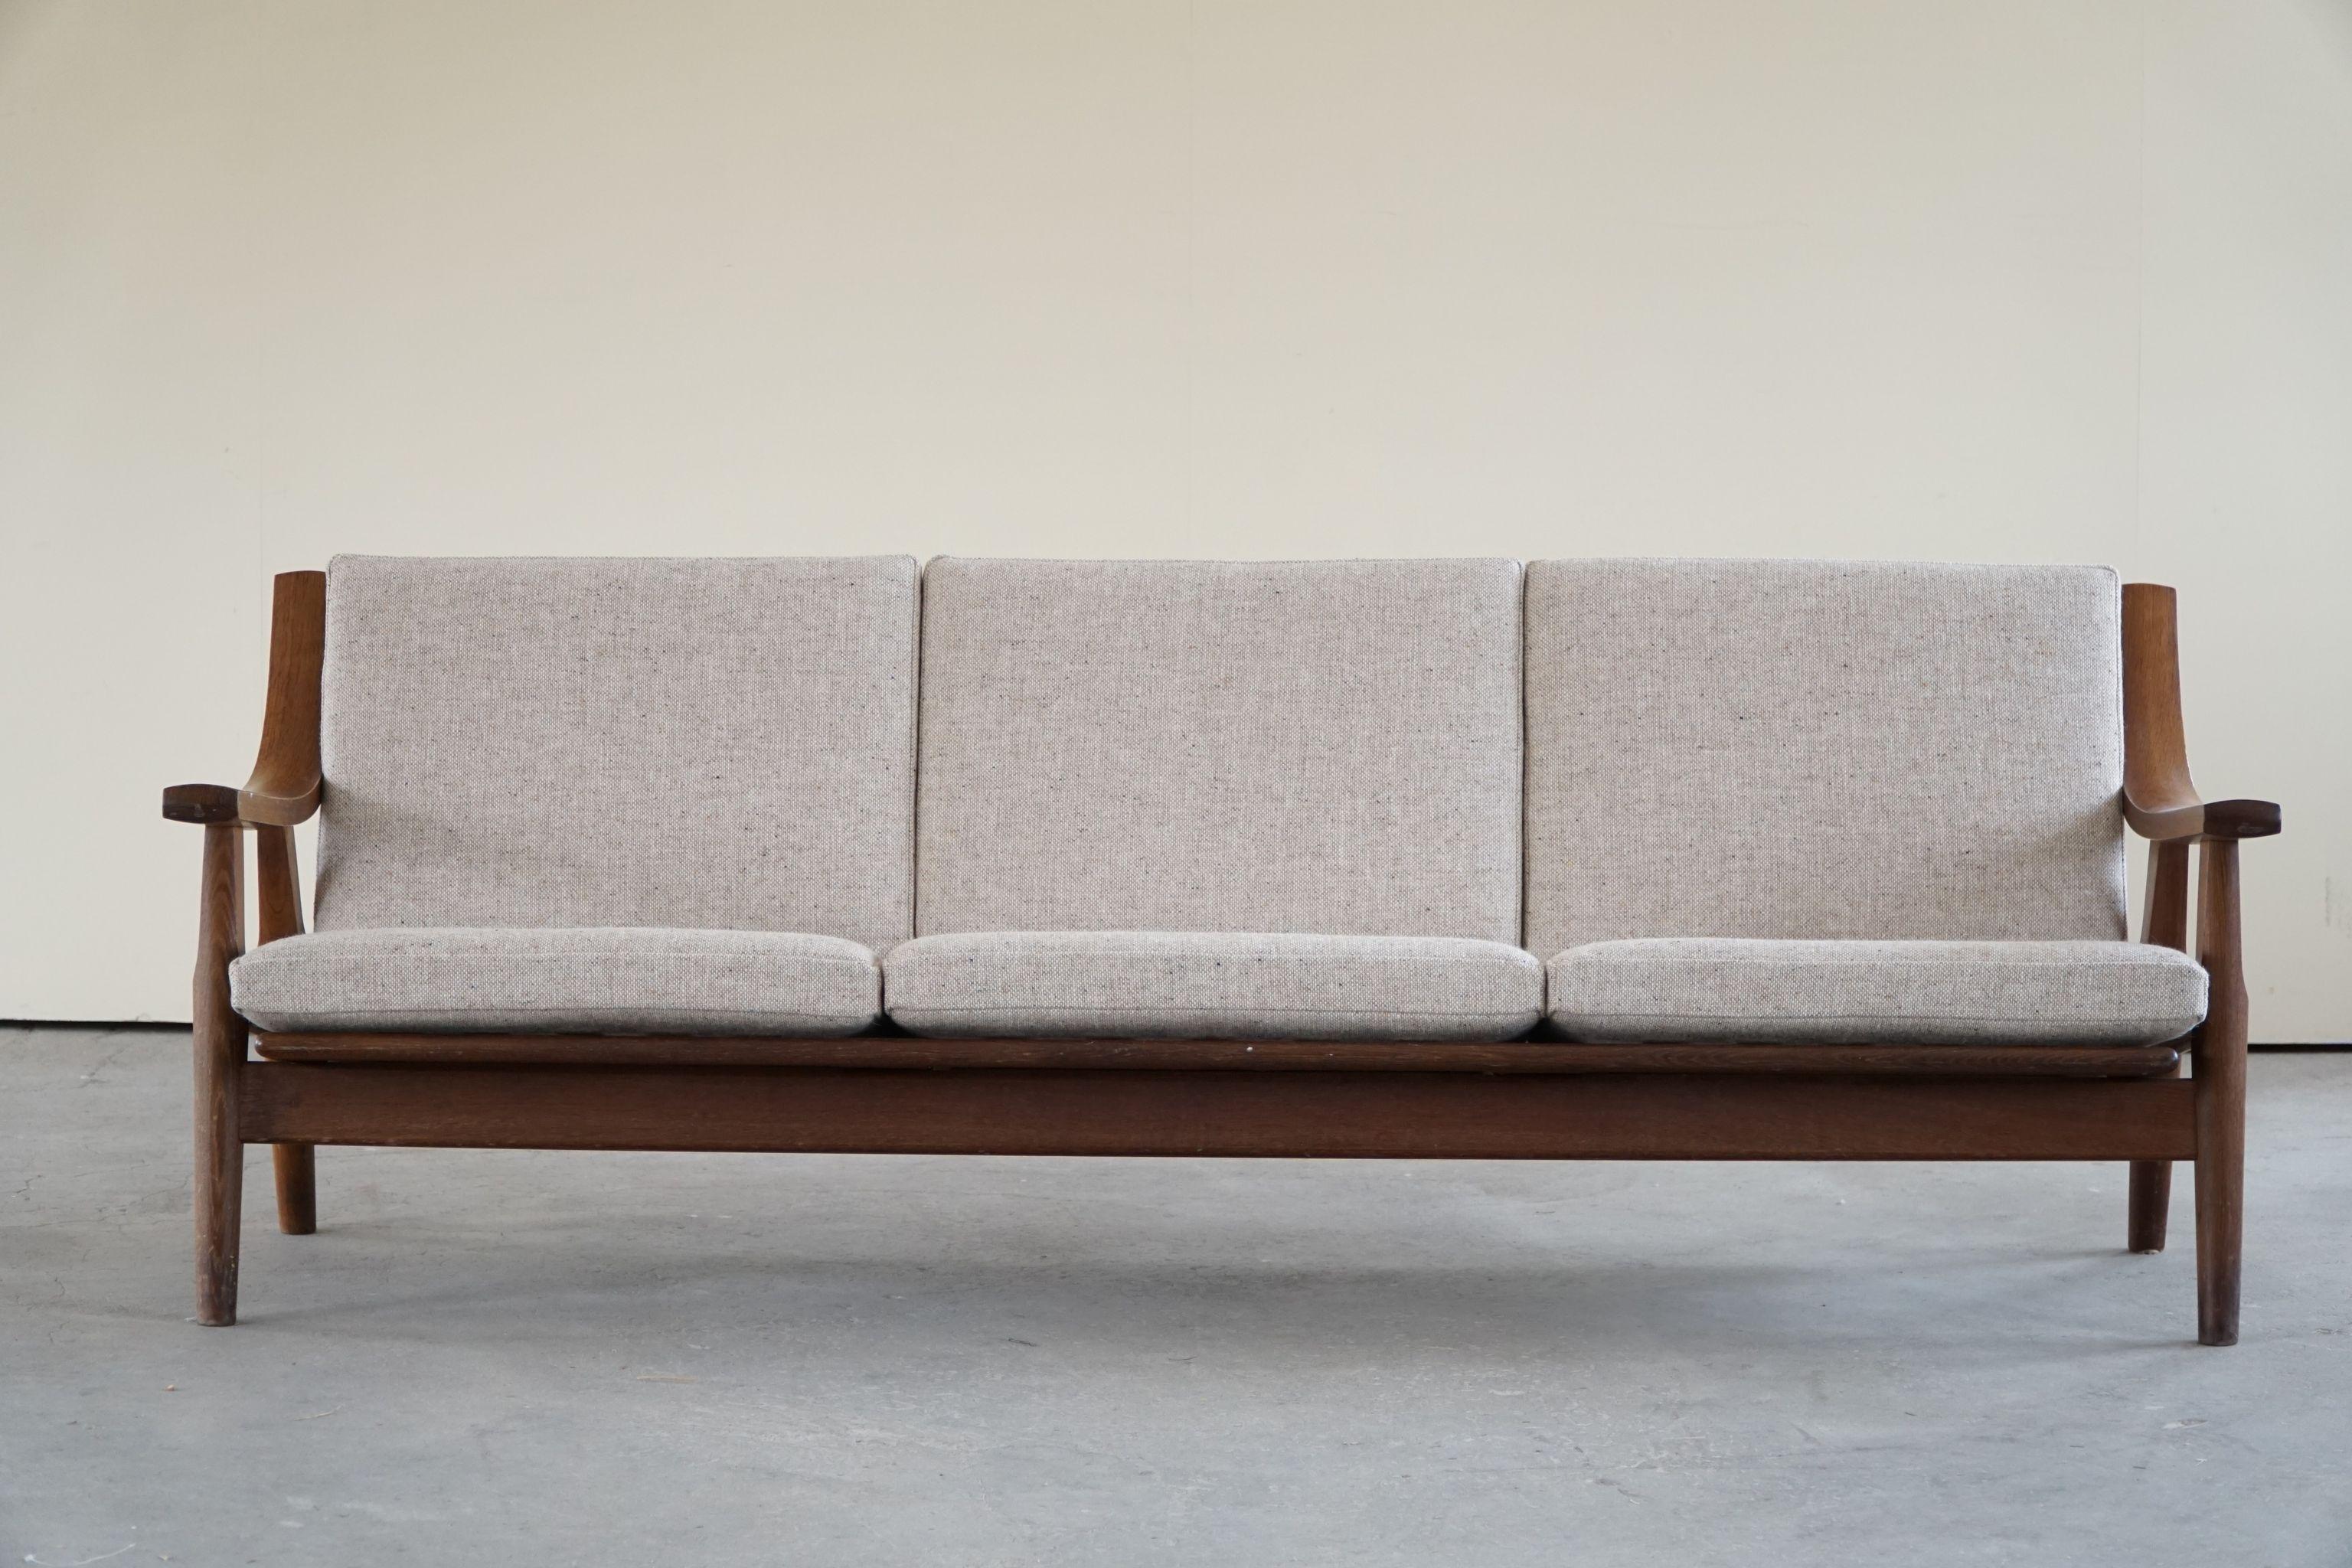 A fine example of a Classical 3-seater sofa in solid dark stained oak, reupholstered cushions in wool. Designed by Hans J. Wegner for Getama. 

This modern sofa is in a really good vintage condition.

Hans J. Wegner (Danish, 1914–2007) was a